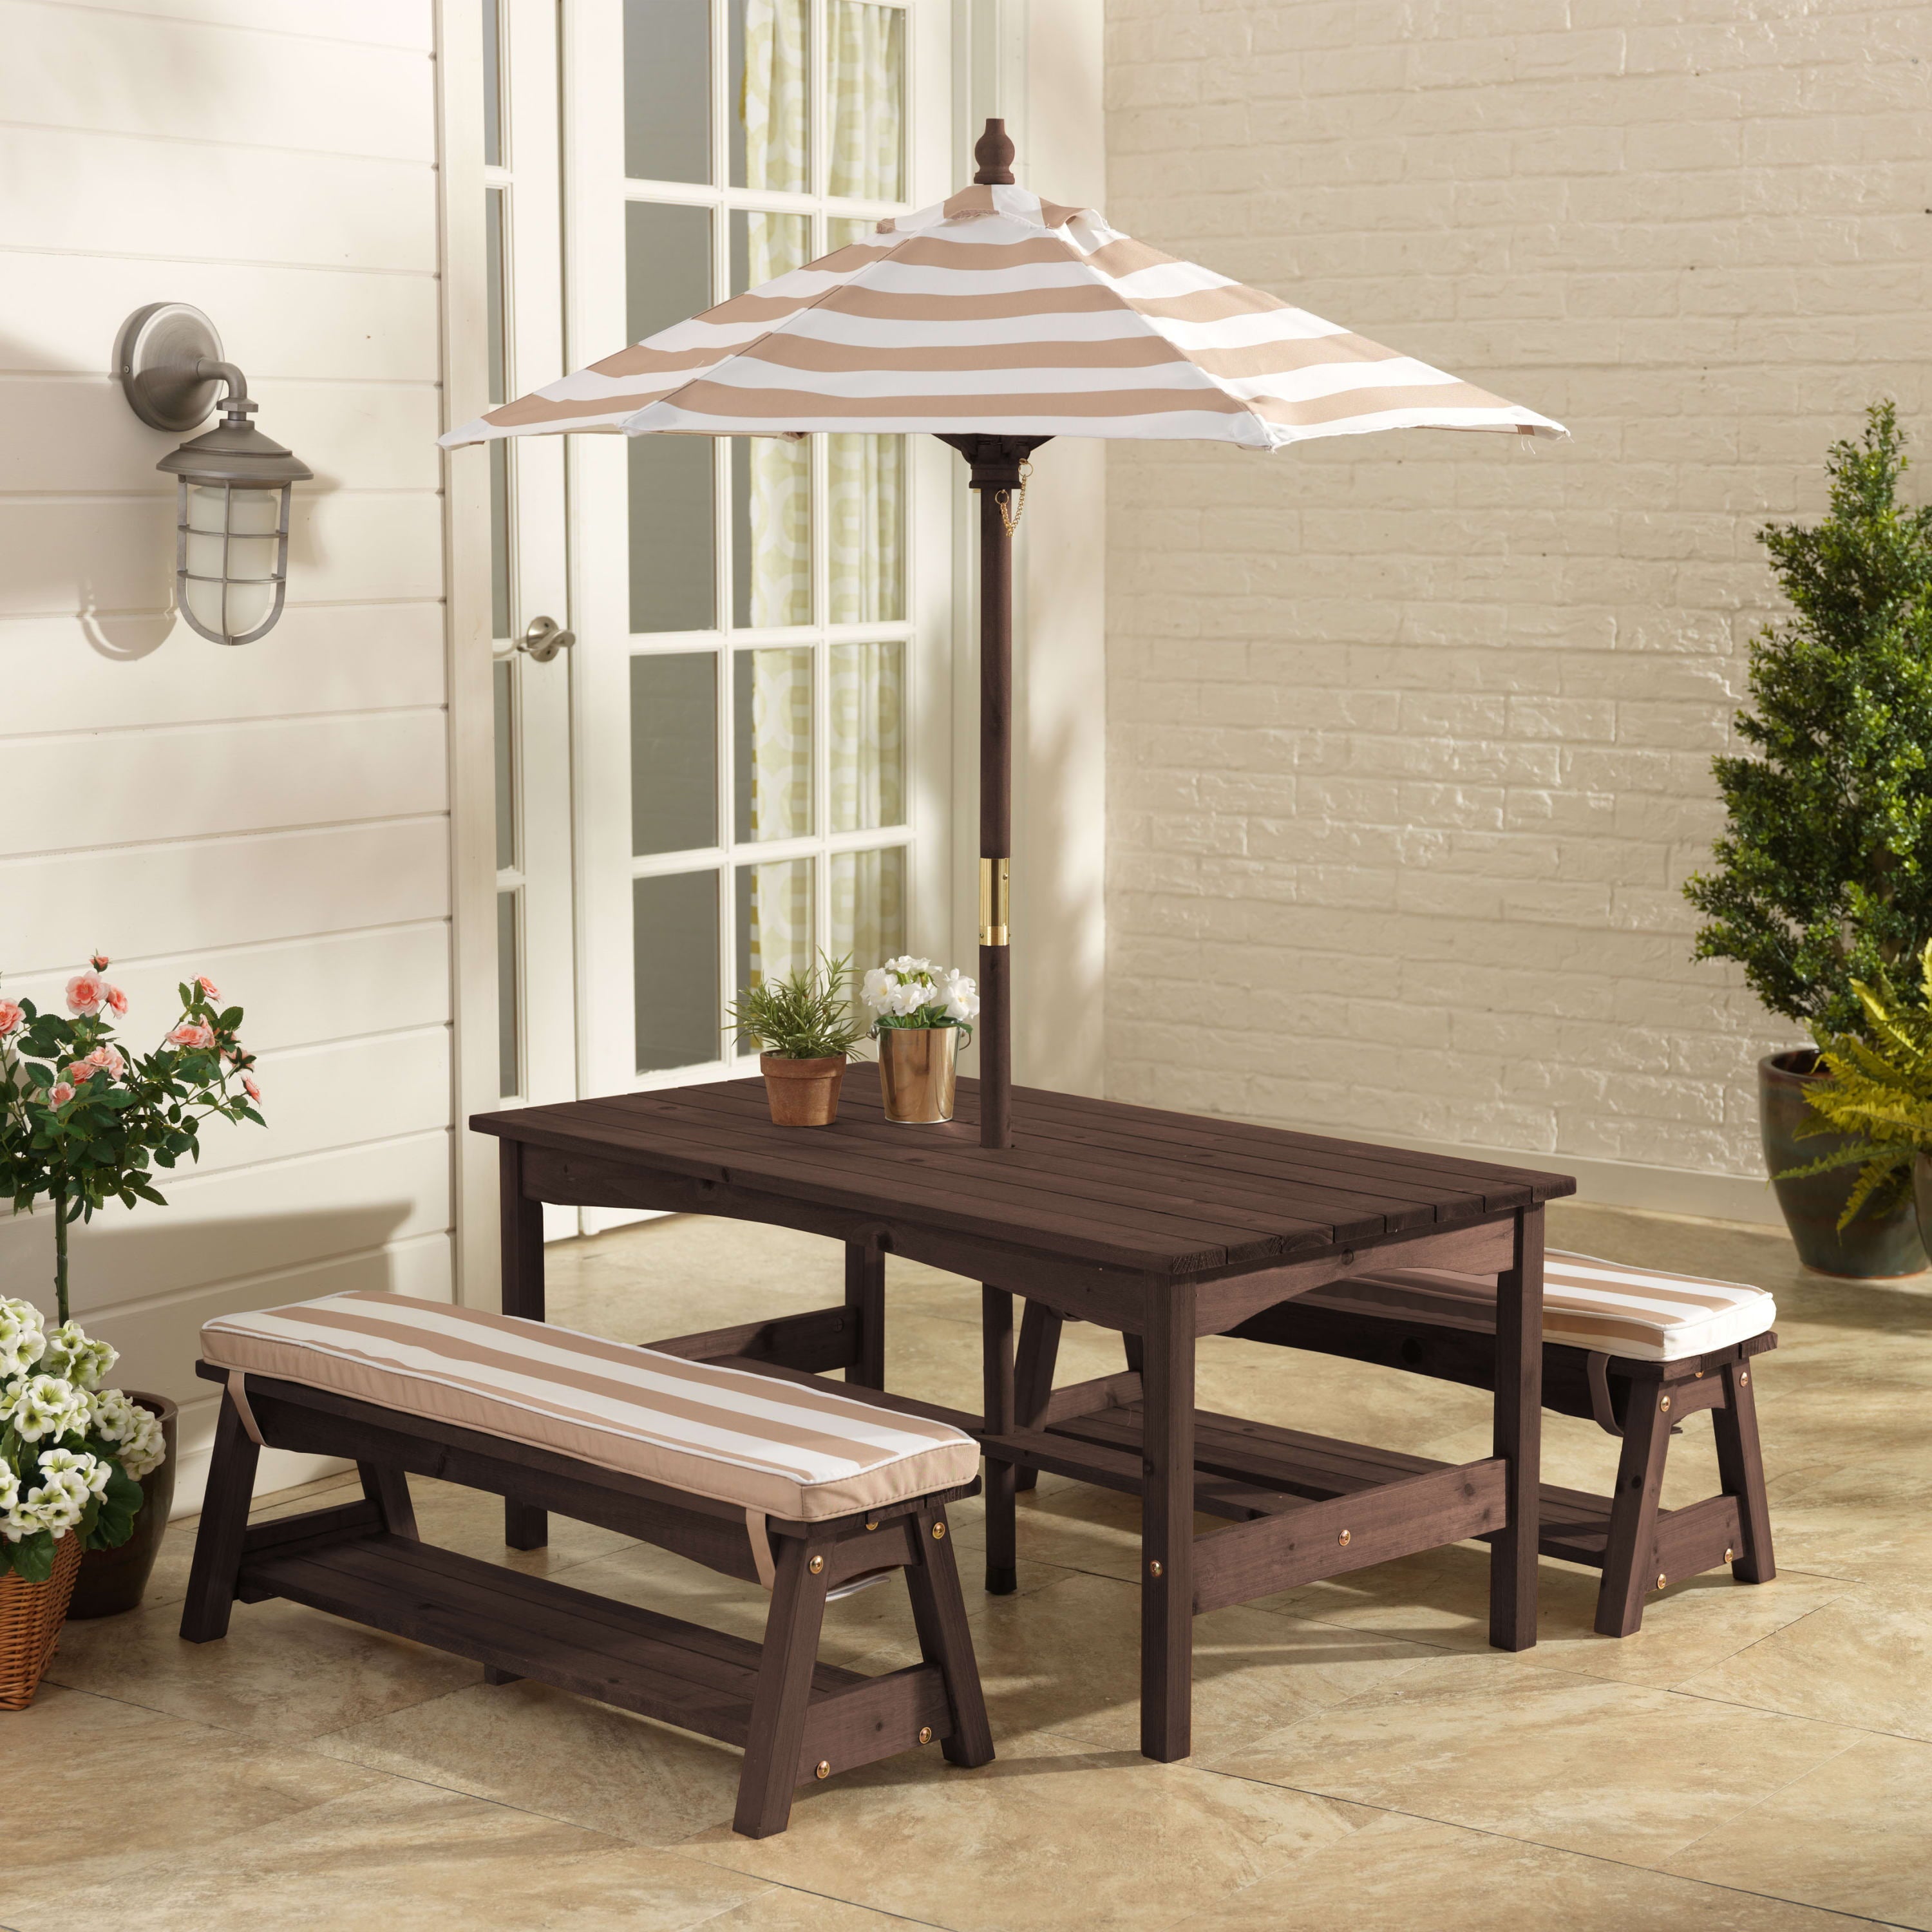 KidKraft KidKraft Outdoor Wooden Table & Bench with Cushions and Umbrella, Espresso